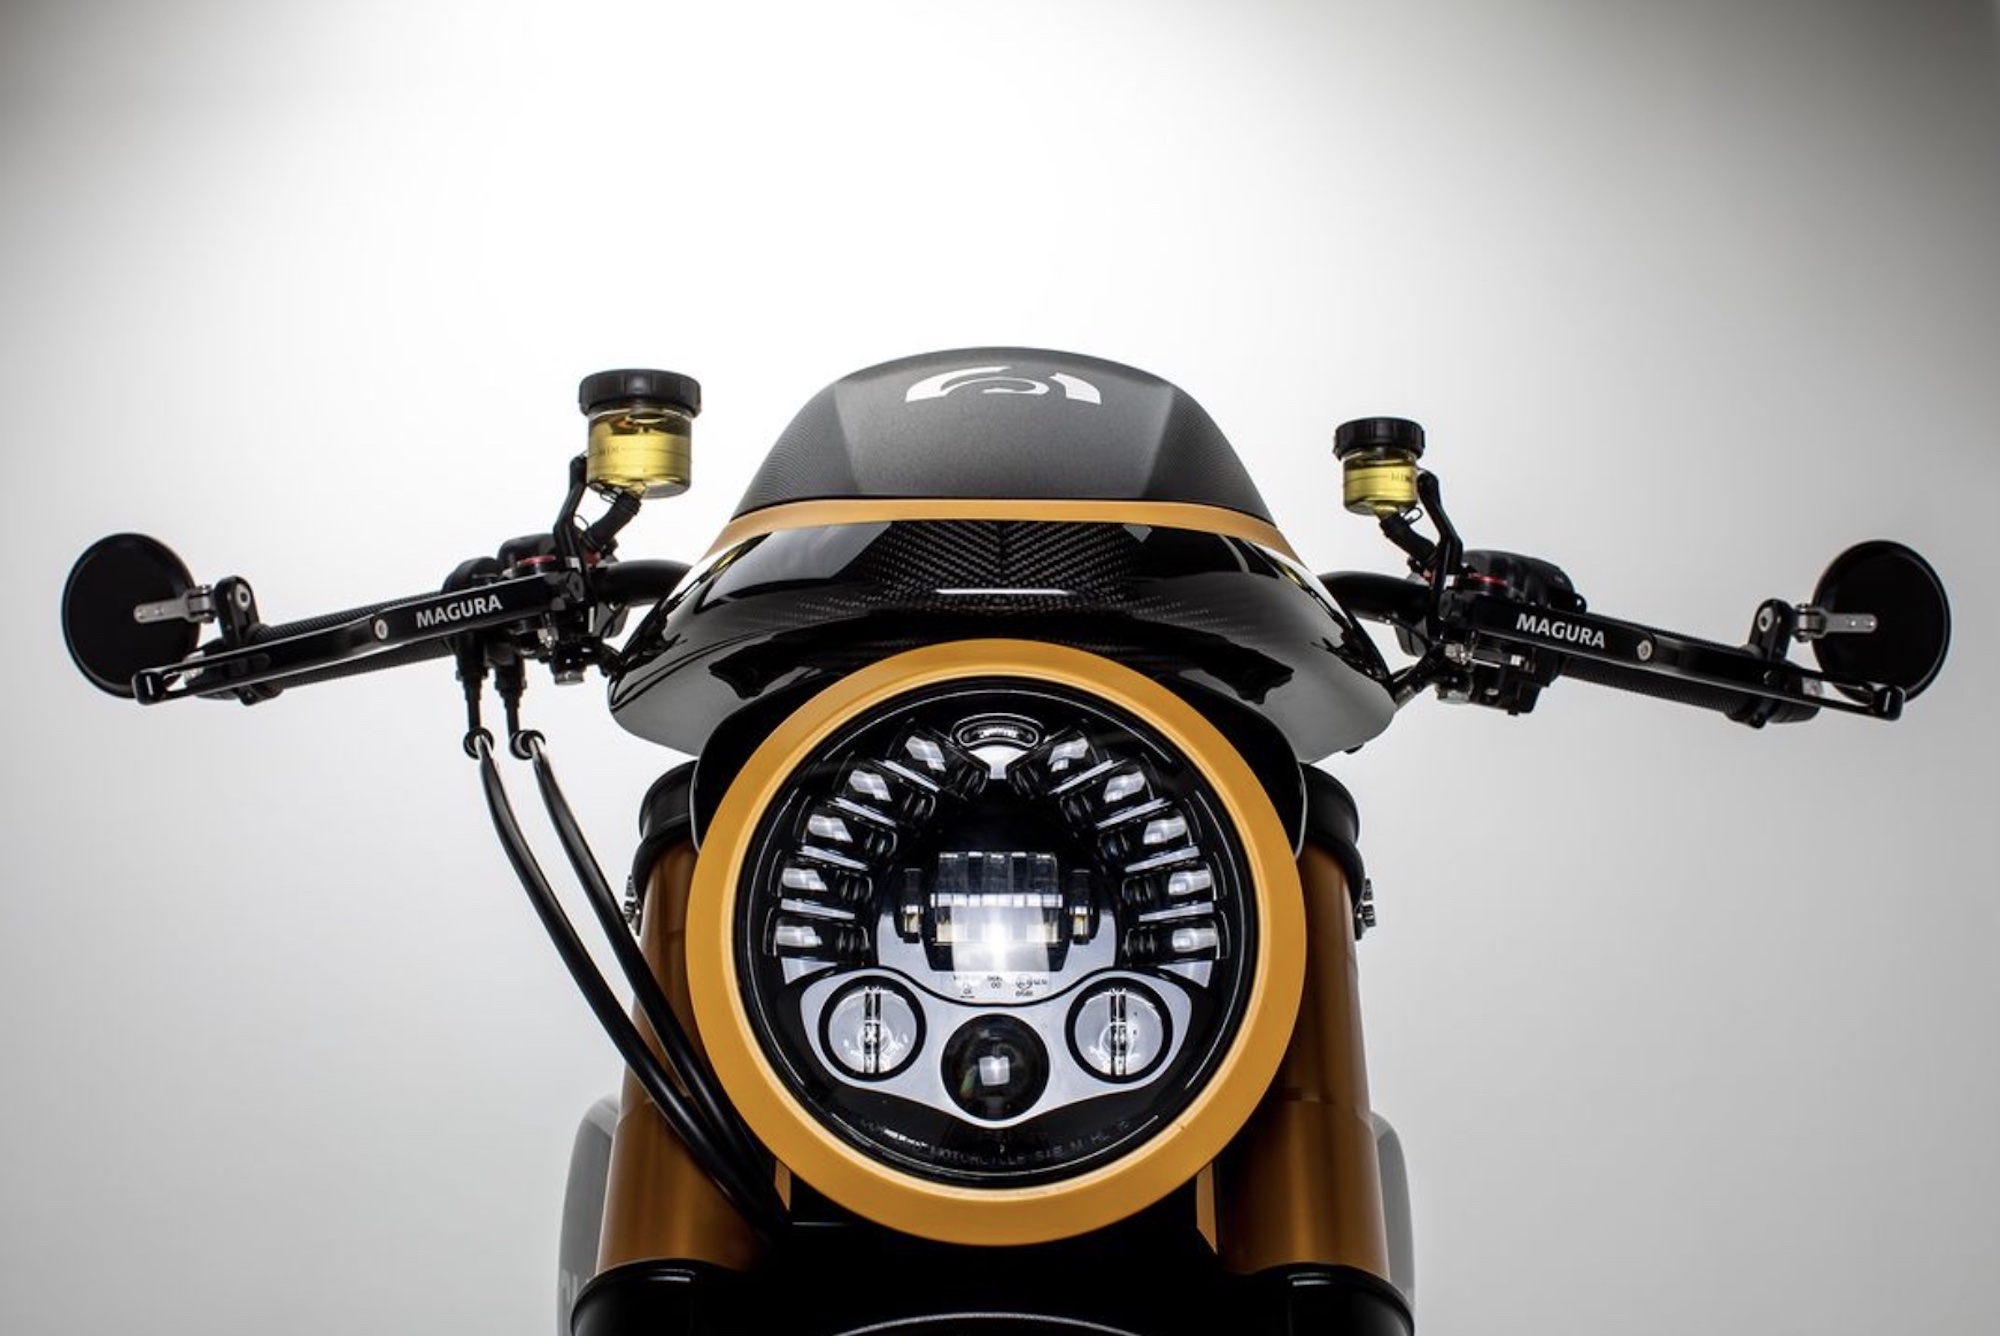 An ARCH KRGT-1. Media sourced from ARCH's IG platform.